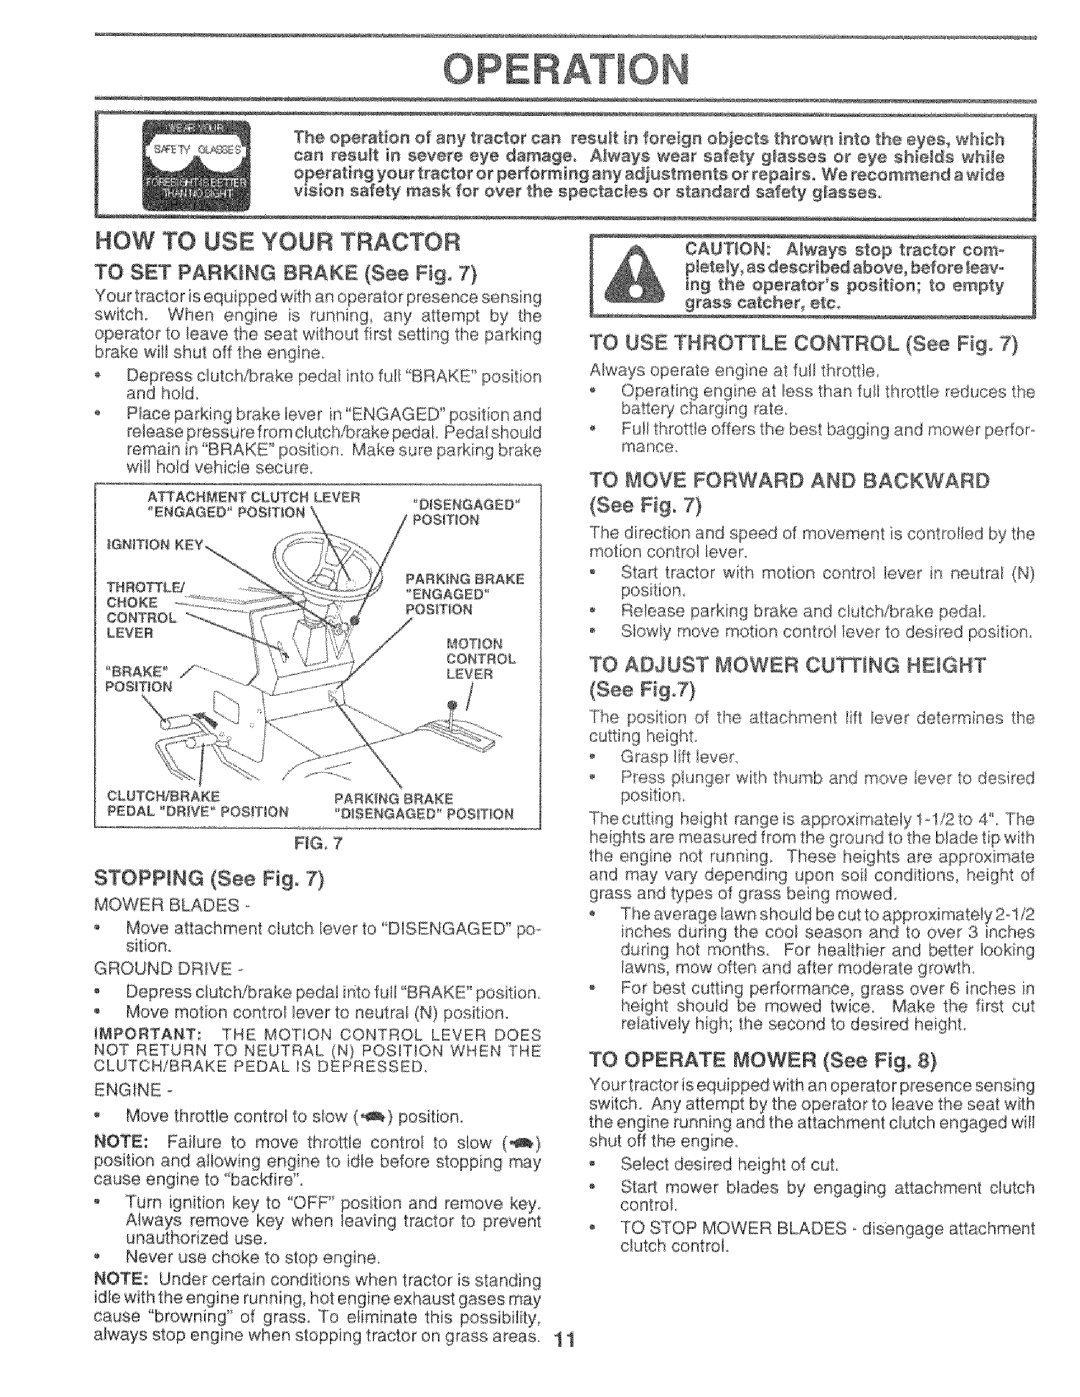 Sears 917.25759 manual TO SET PARKING BRAKE See Fig, TO USE THRO_LE CONTROL See Fig, To Move Forward And Backward 